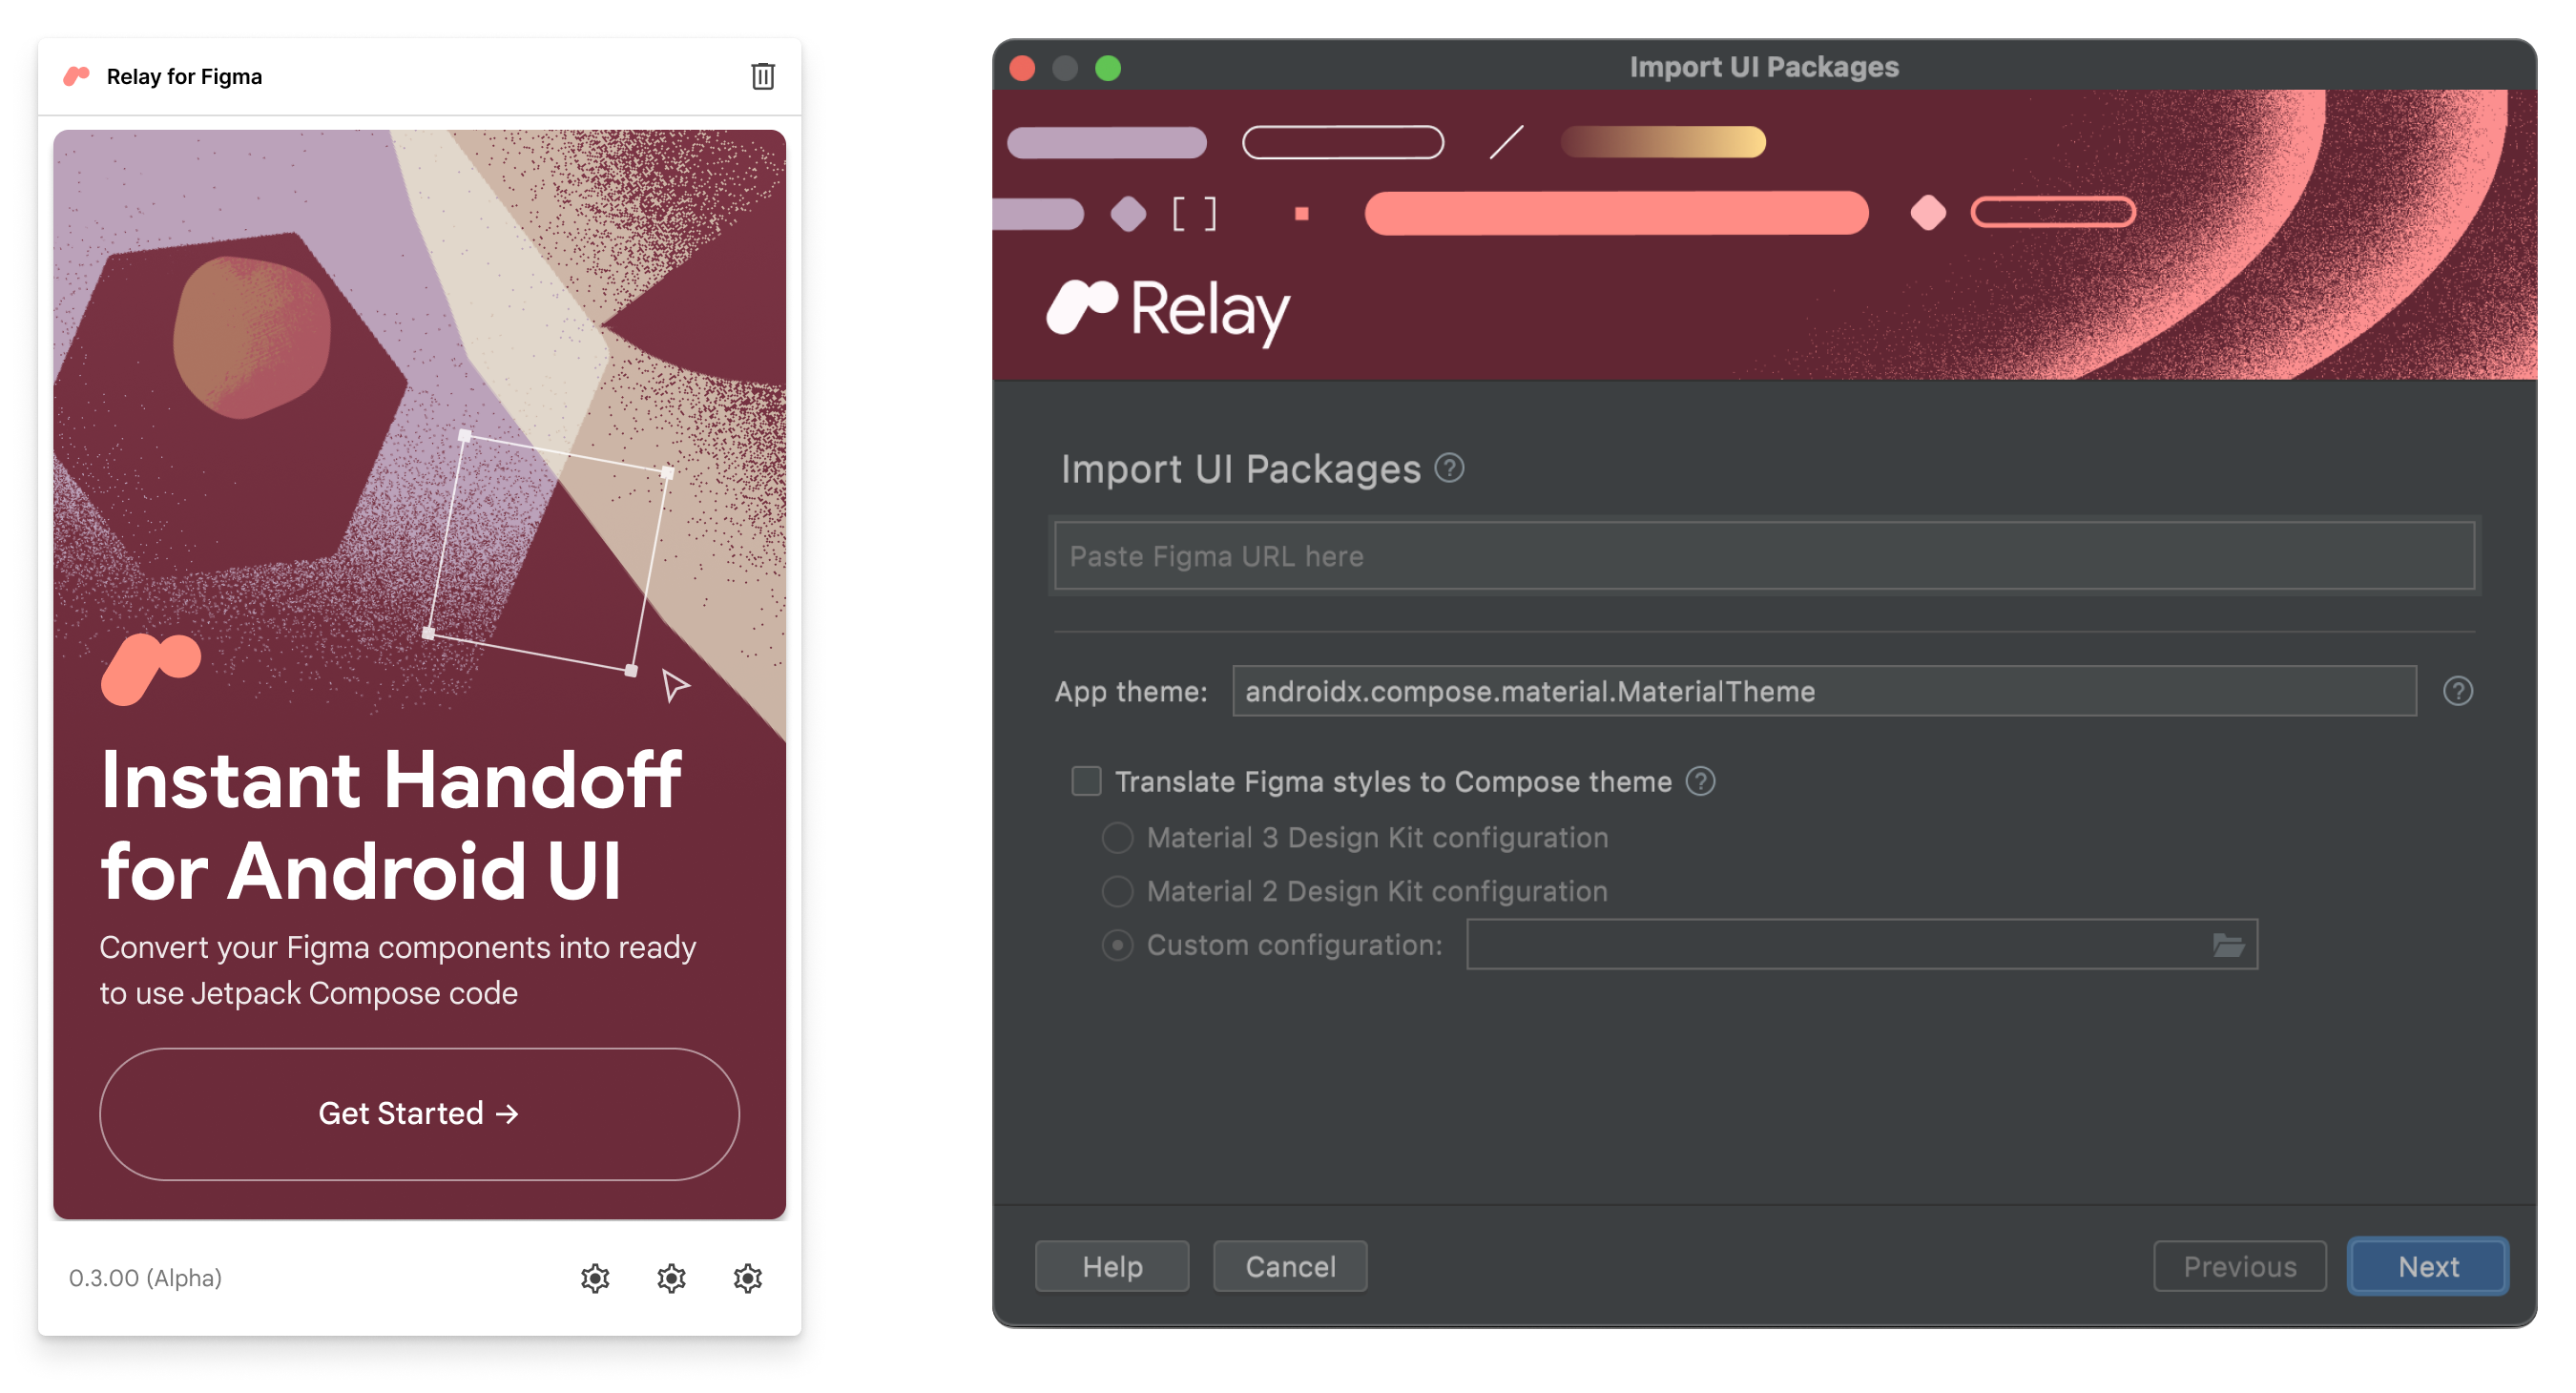 Relay for Figma and Relay for Android Studio